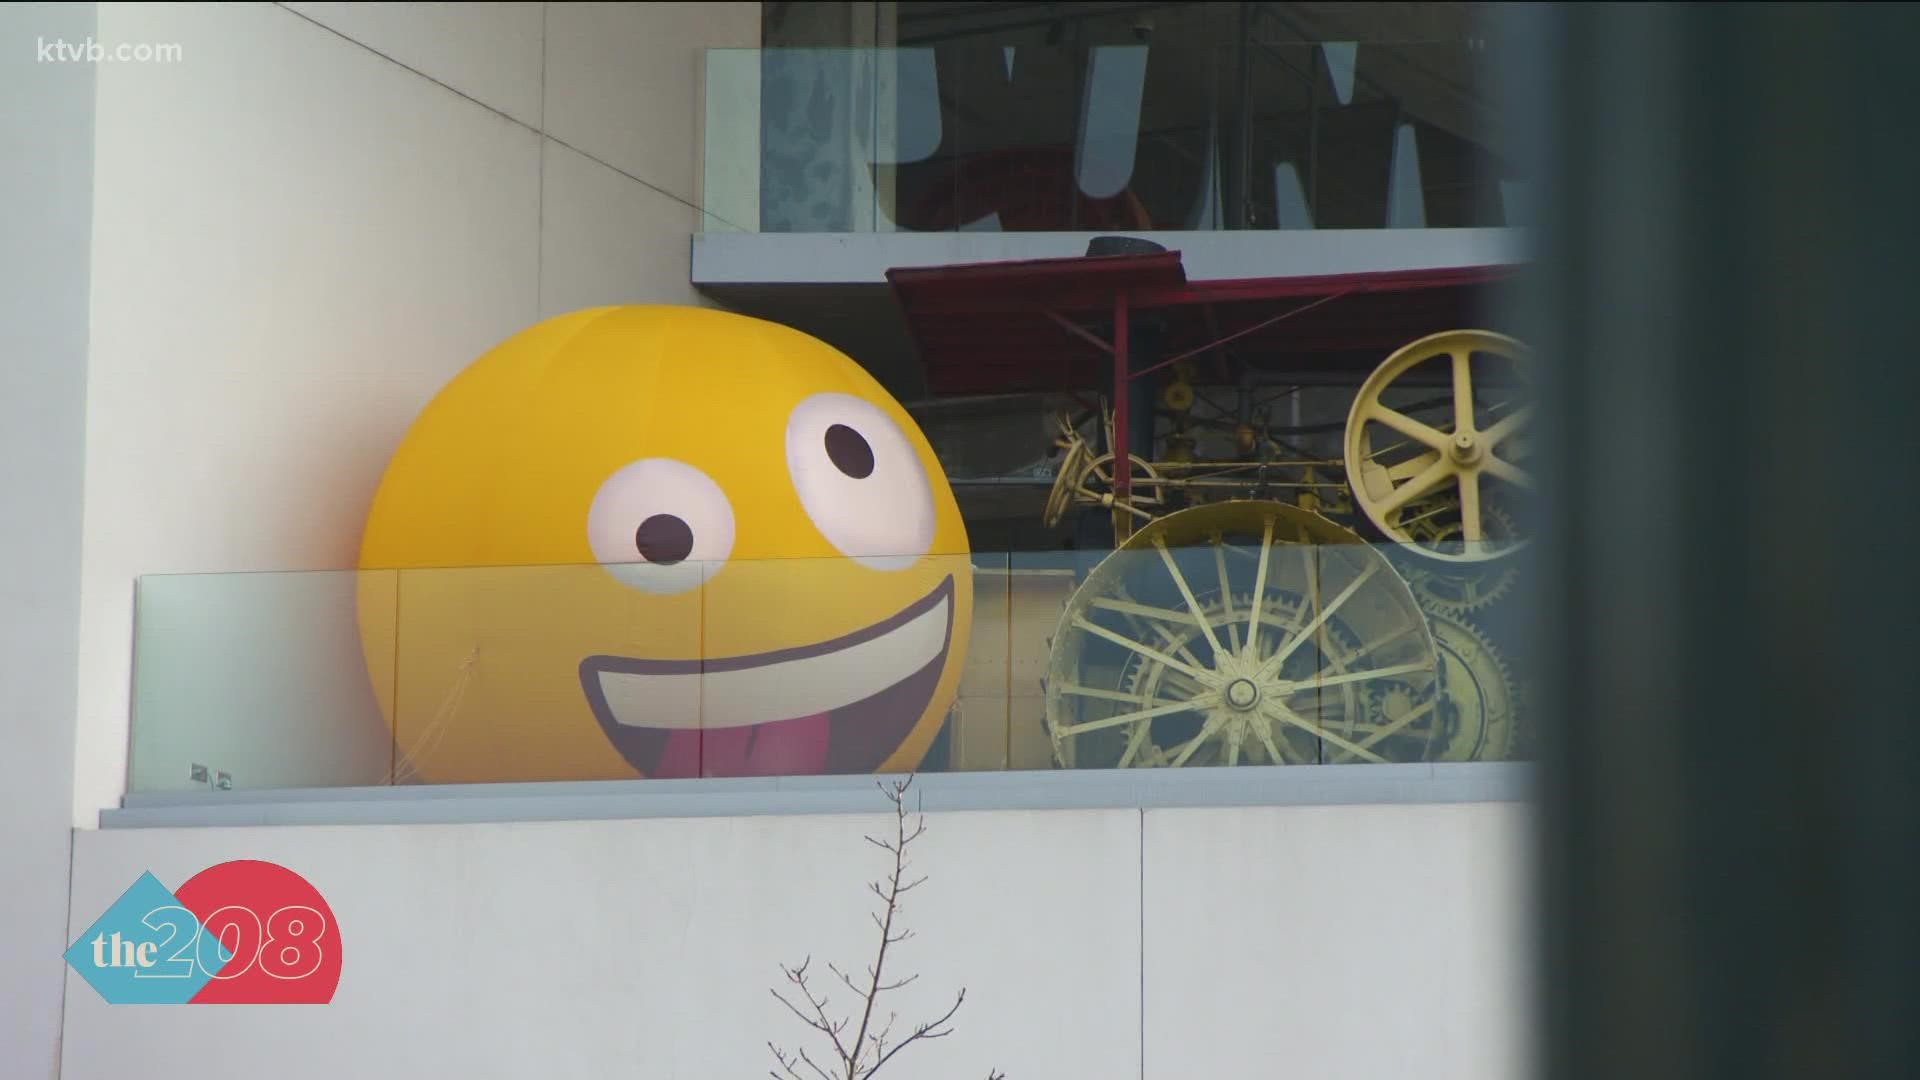 Jack's Urban Meeting Place is using the emojis as part of its Giggling for Good campaign, which donates clothing and hygiene products to the Boise School District.